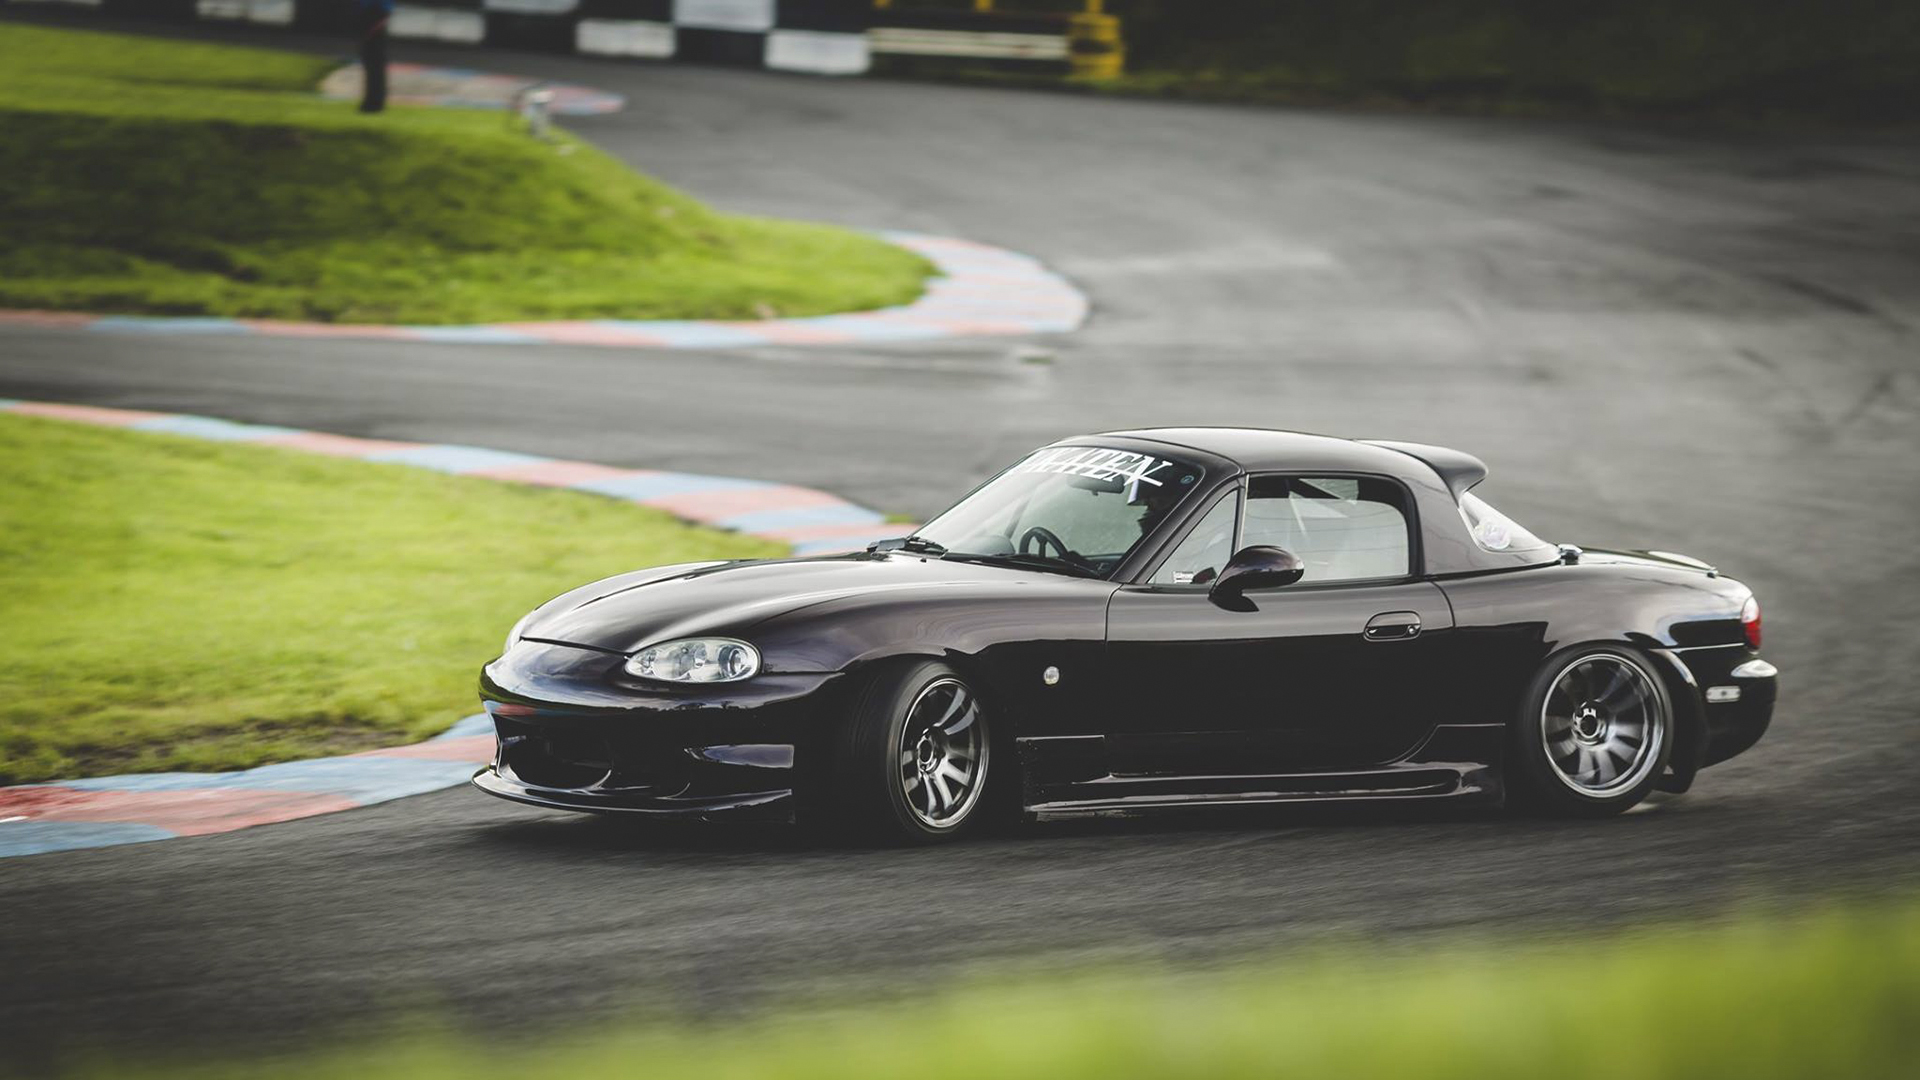 NB Drift MX5 owned by Conor Wilson